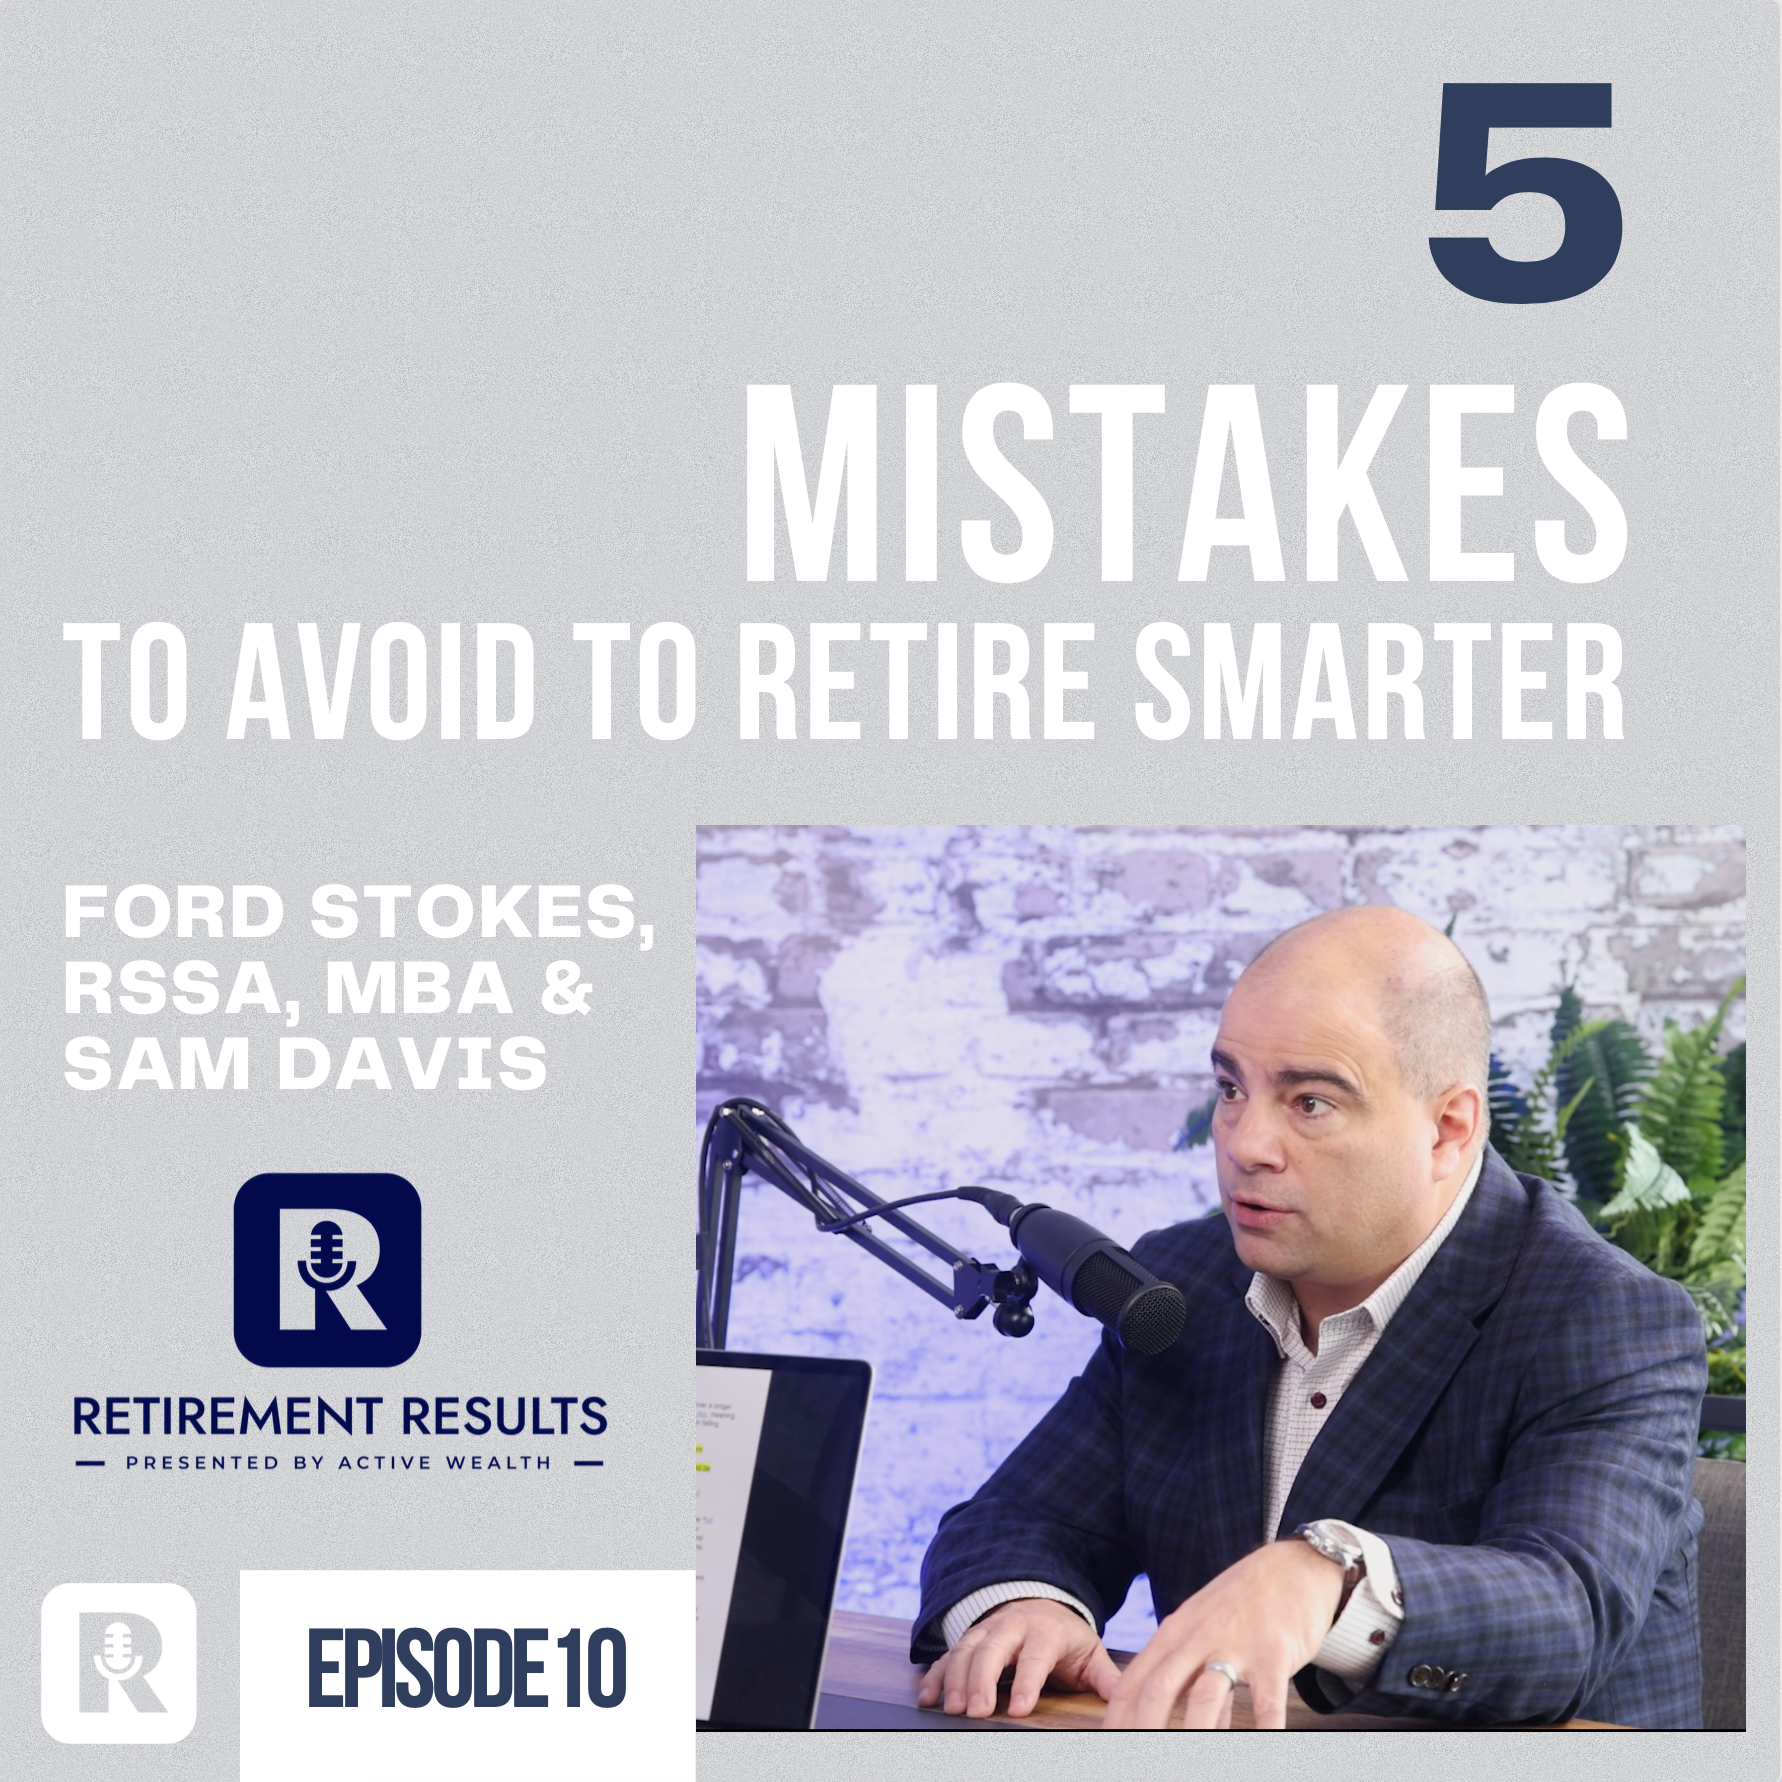 Retirement Red Flags: 5 Mistakes to Avoid While Planning Your Future